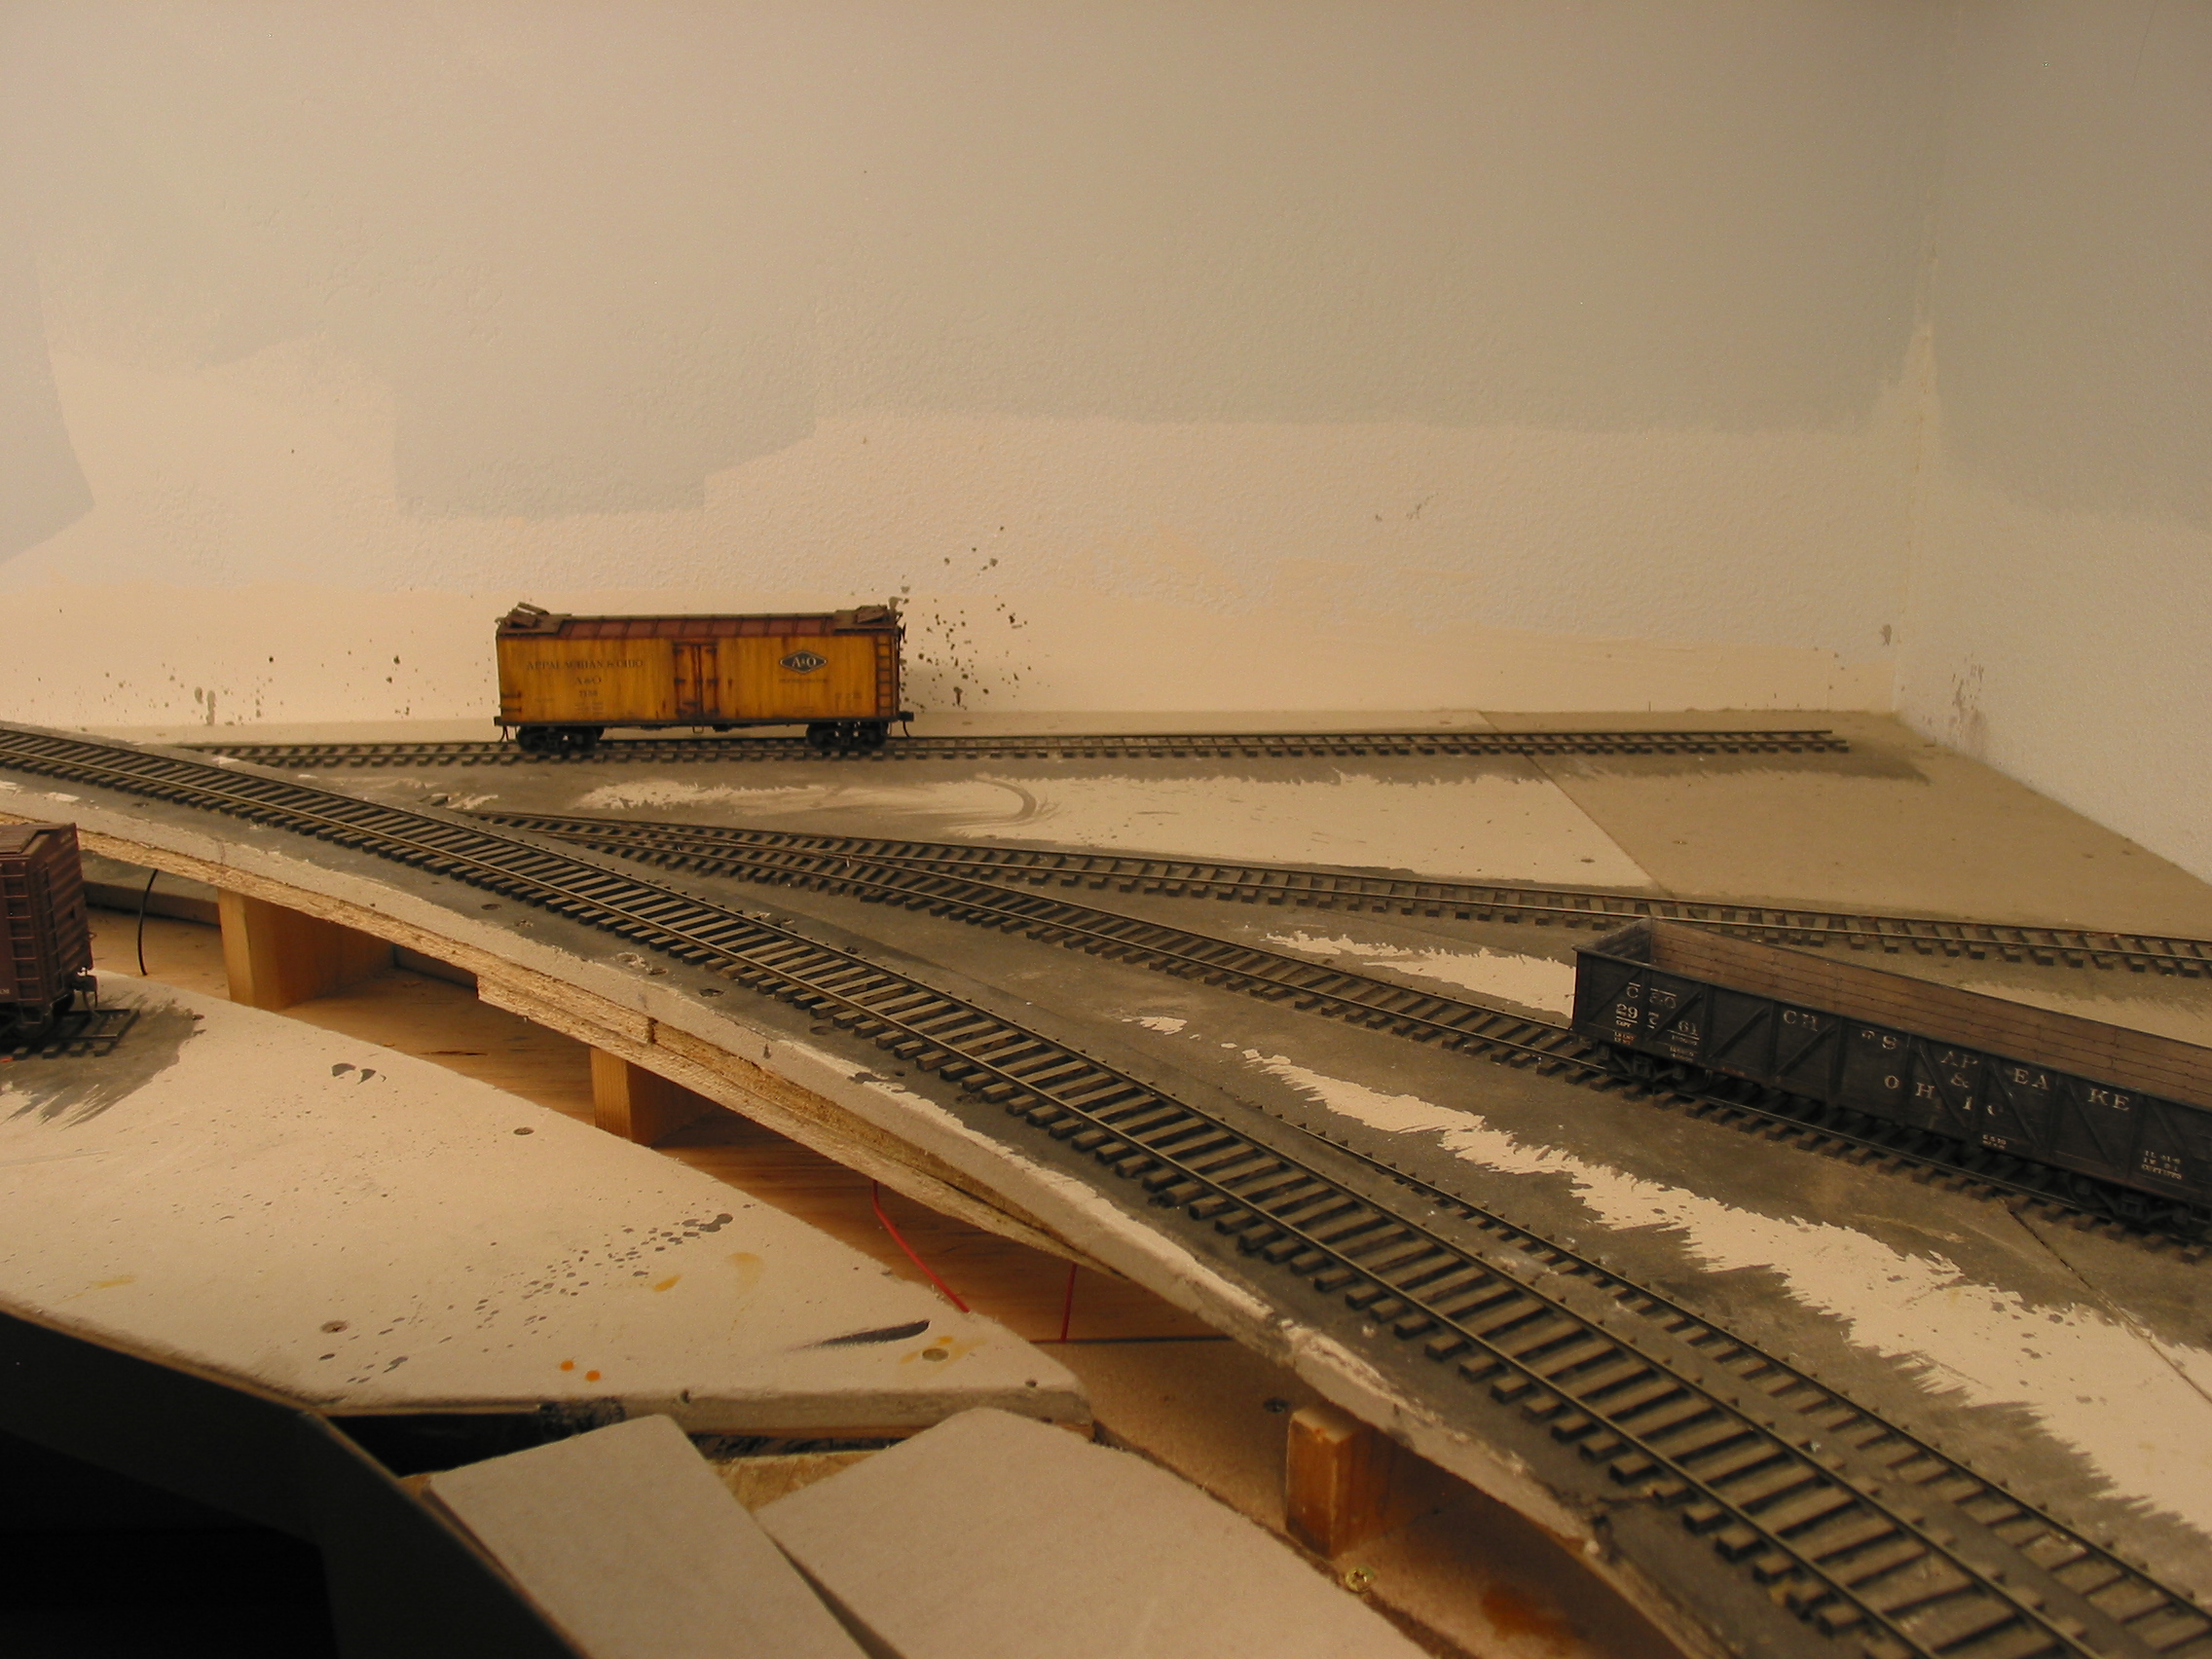  A lone reefer sits along the future ice dock while a gon sits on the loading track for the American Boiler Co. Removable inbound sheet metal loads and outbound boilers will require the switch crew to play put-'n-take with the car loads. 